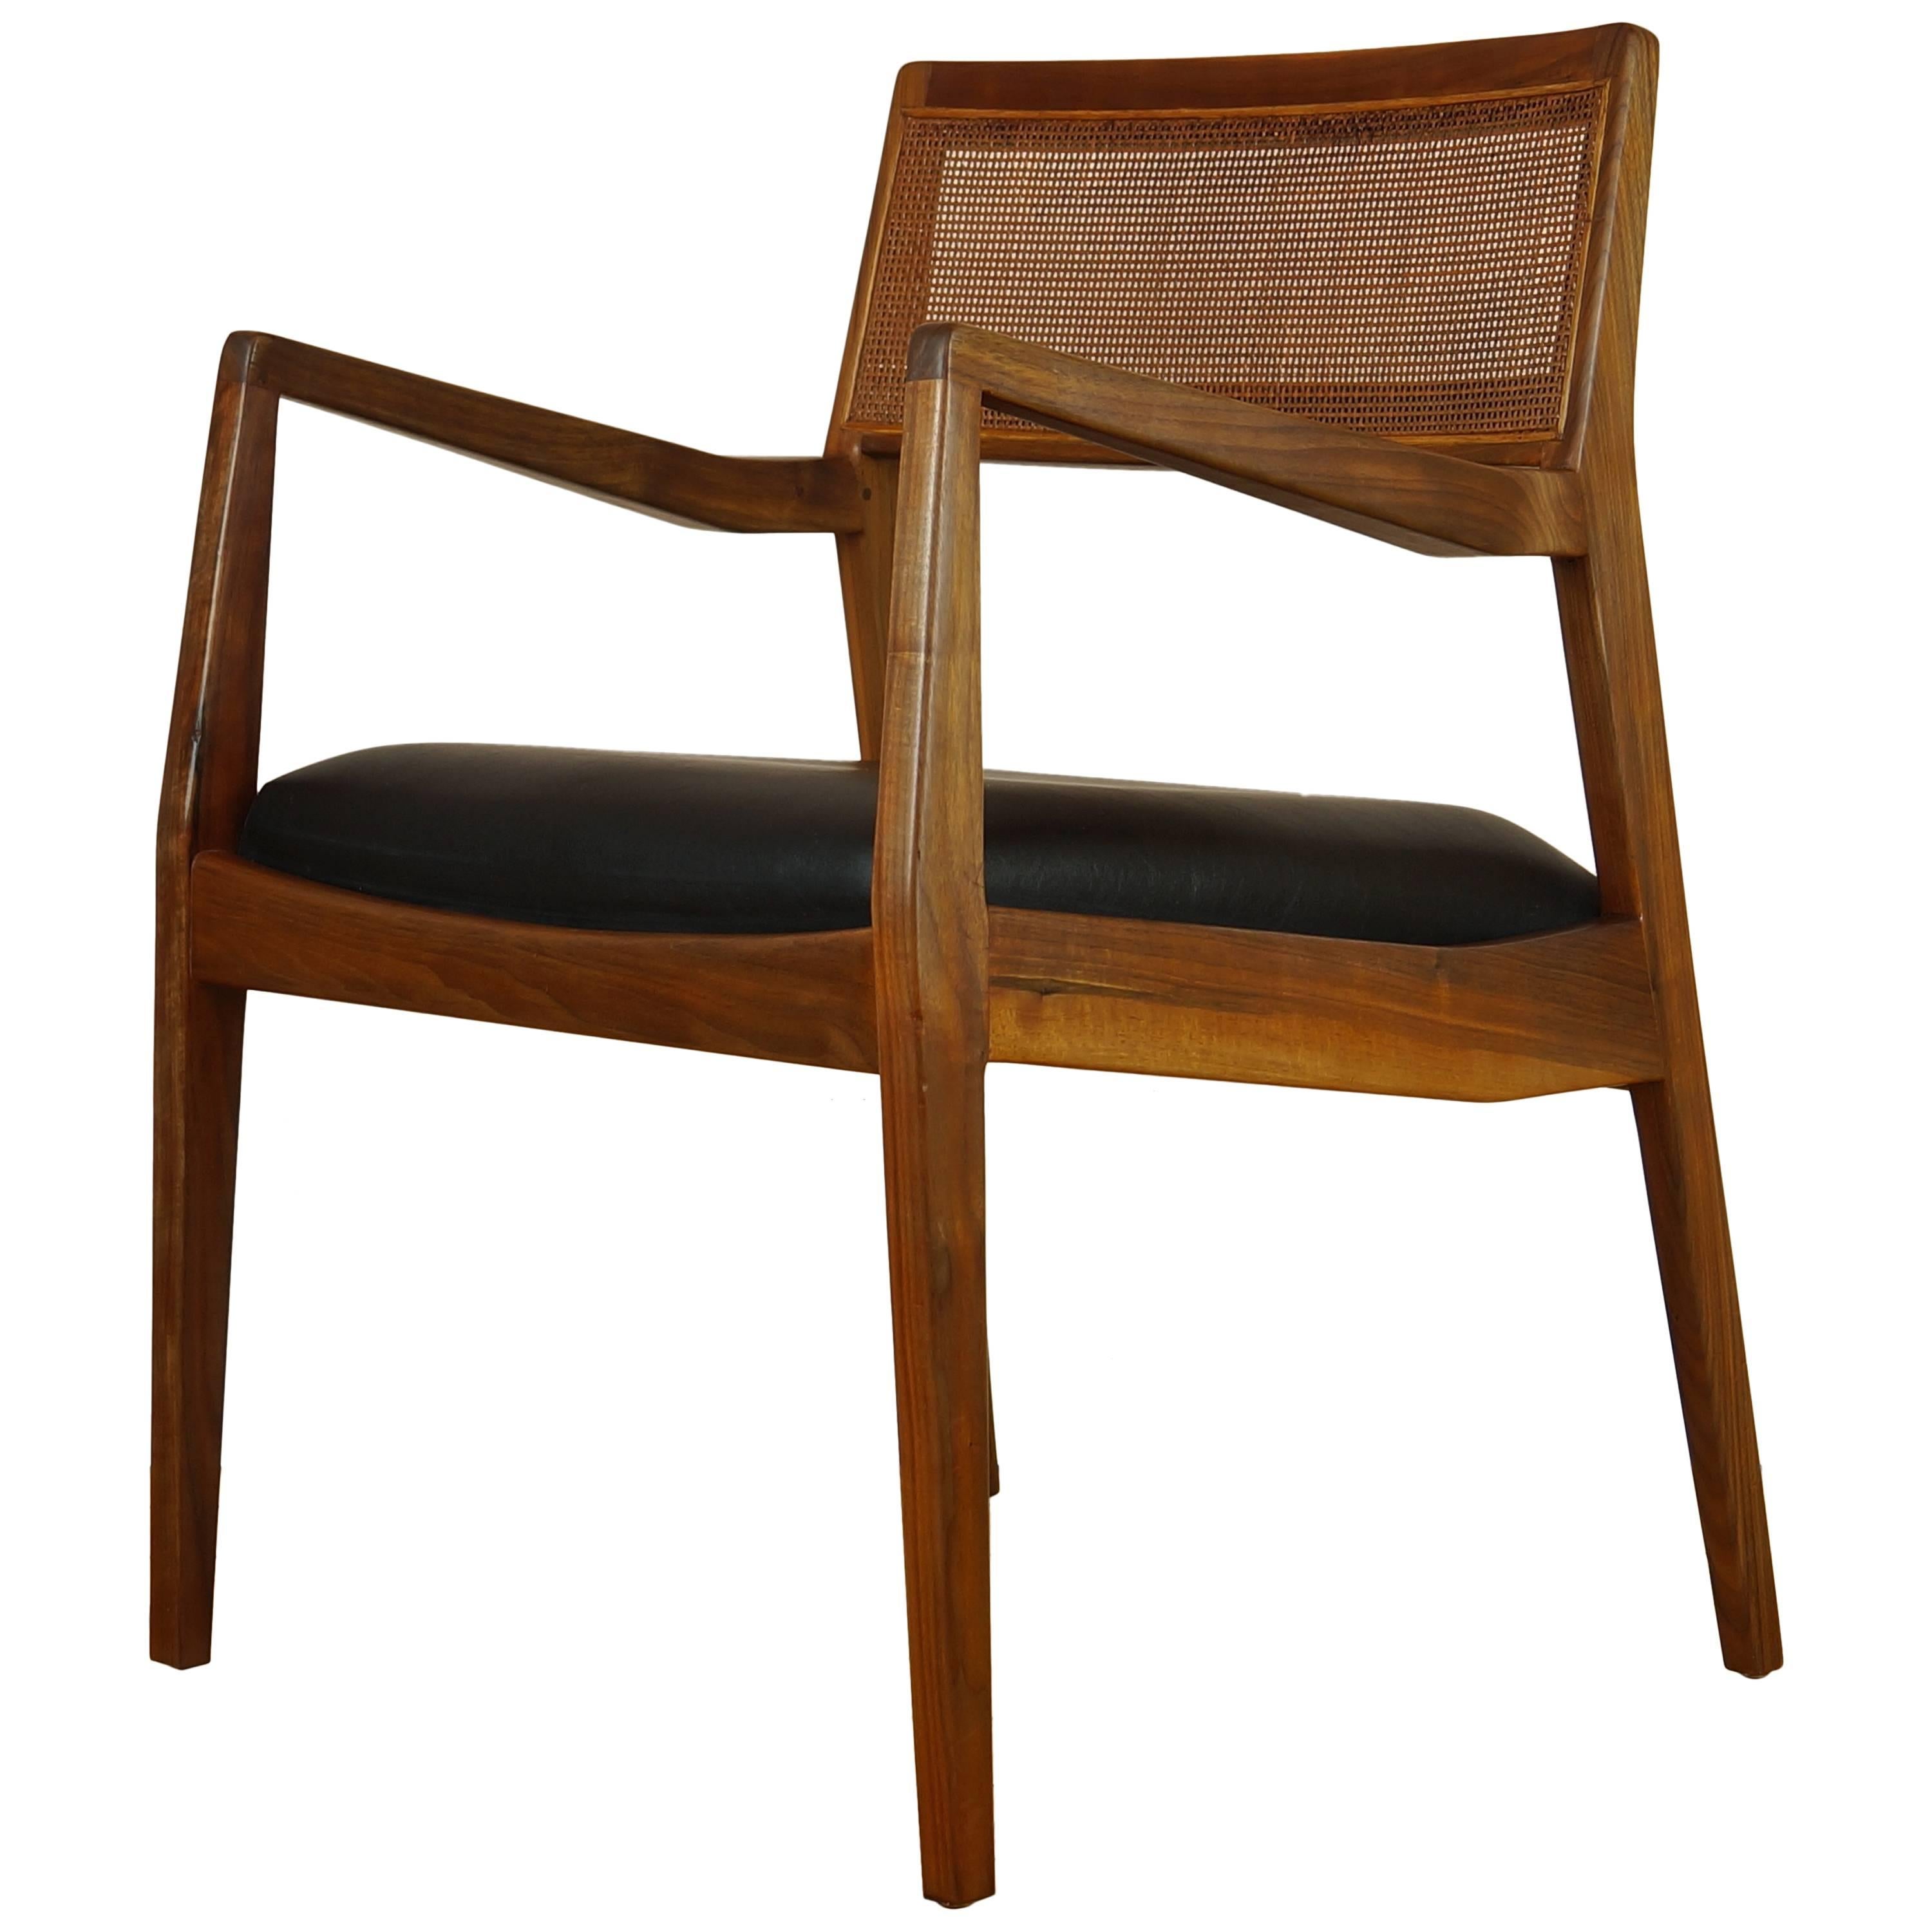 Vintage 1950s Walnut C140 Playboy Lounge Chair or Armchair by Jens Risom